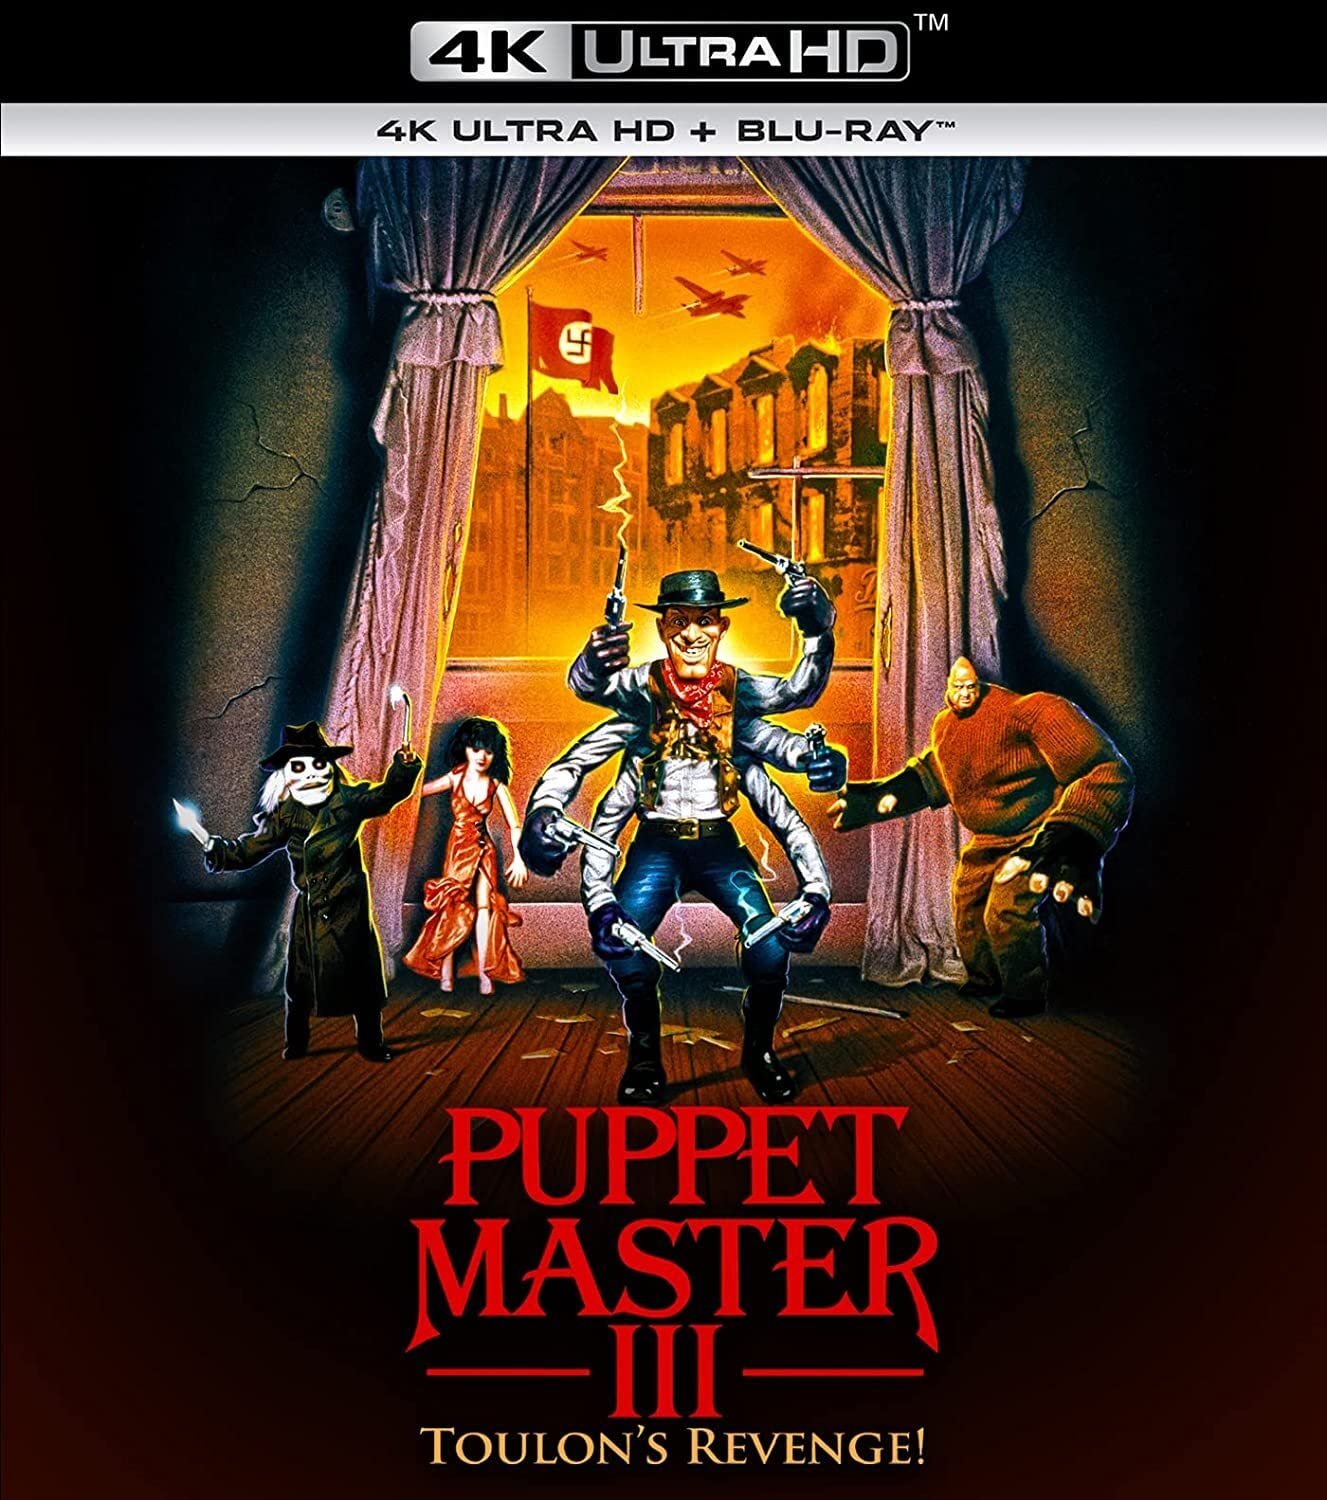 Puppet Master: The Game - Full Moon Features